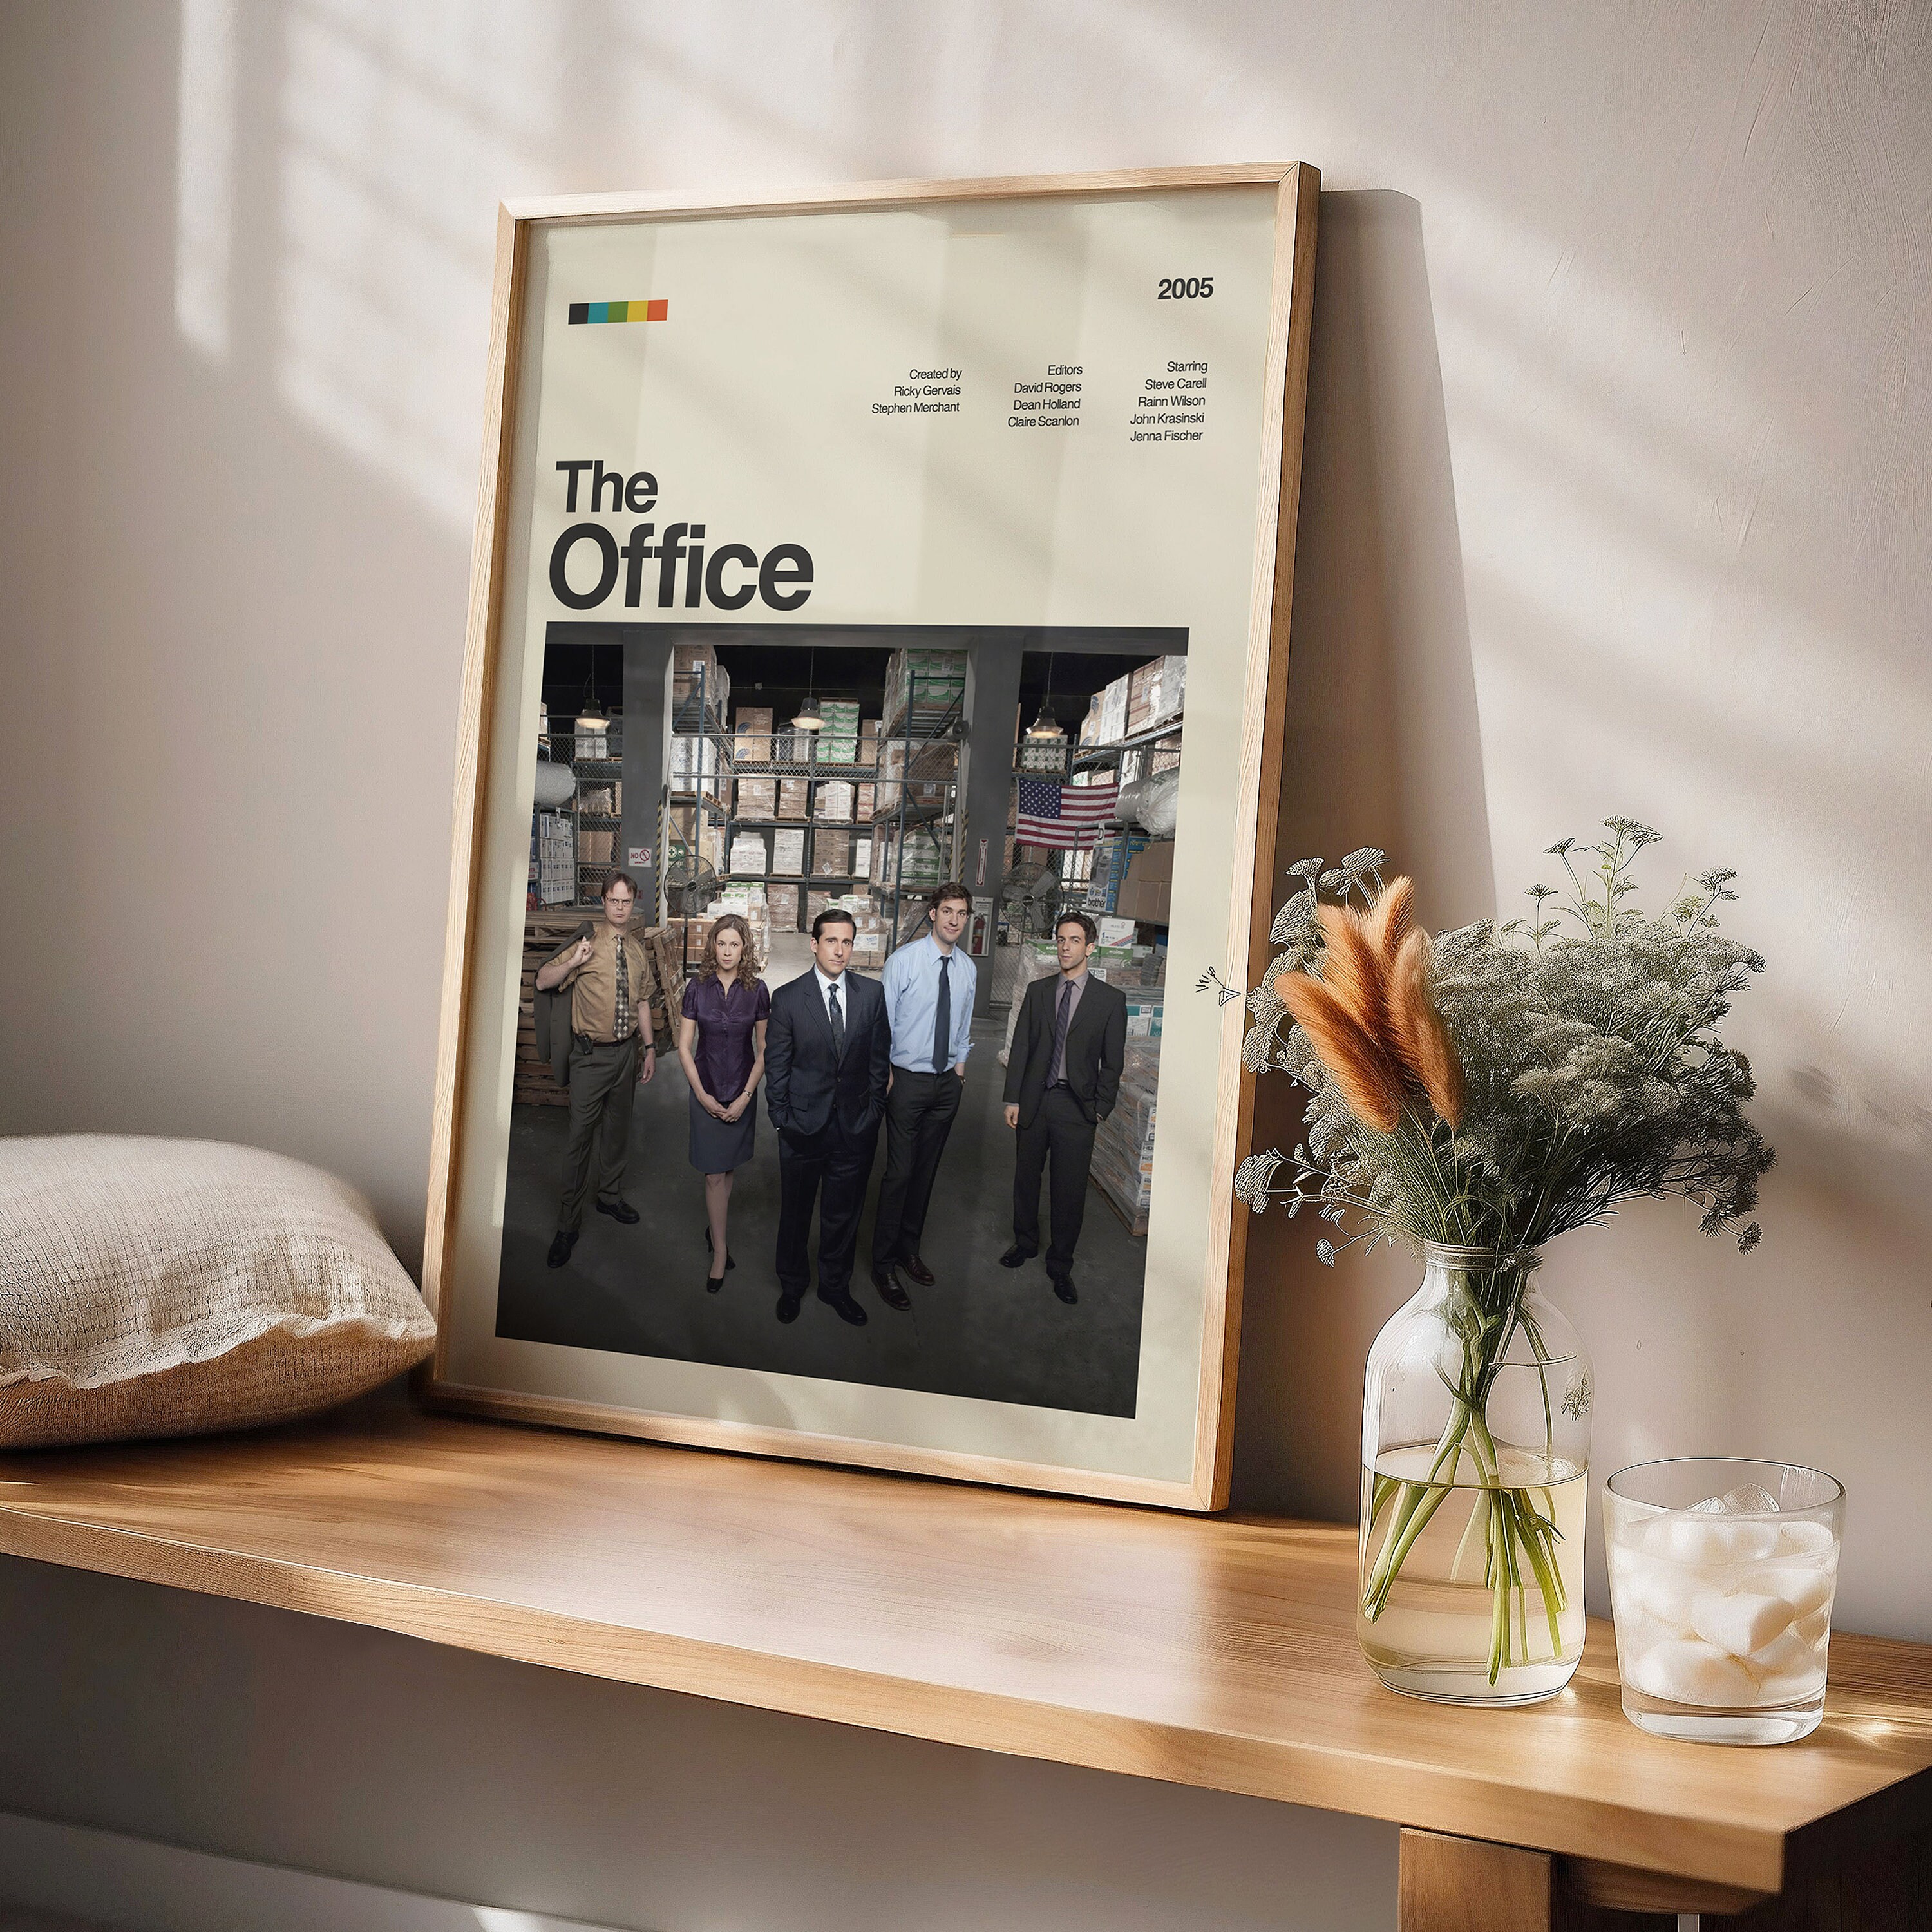 The Office Poster Print No: 2, Tv Show Poster